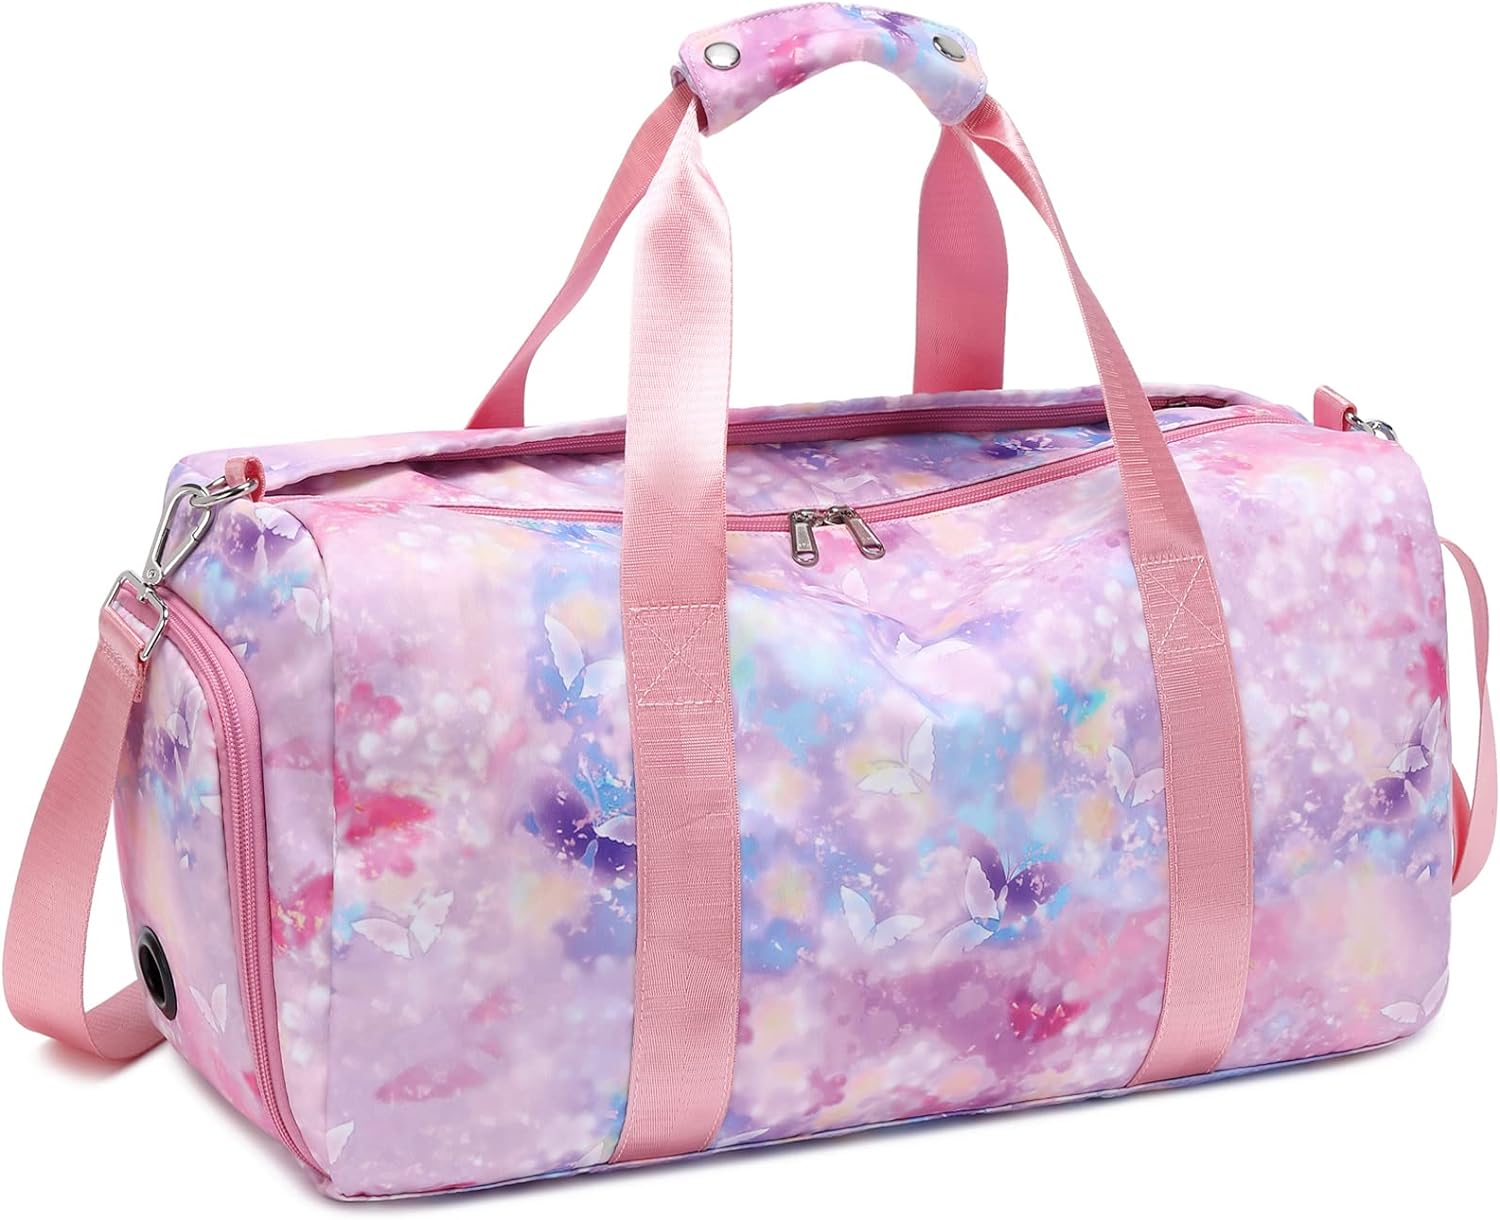 Sequins Gym Bag Travel Duffel bag with Wet Pocket & Shoes Compartment for women 